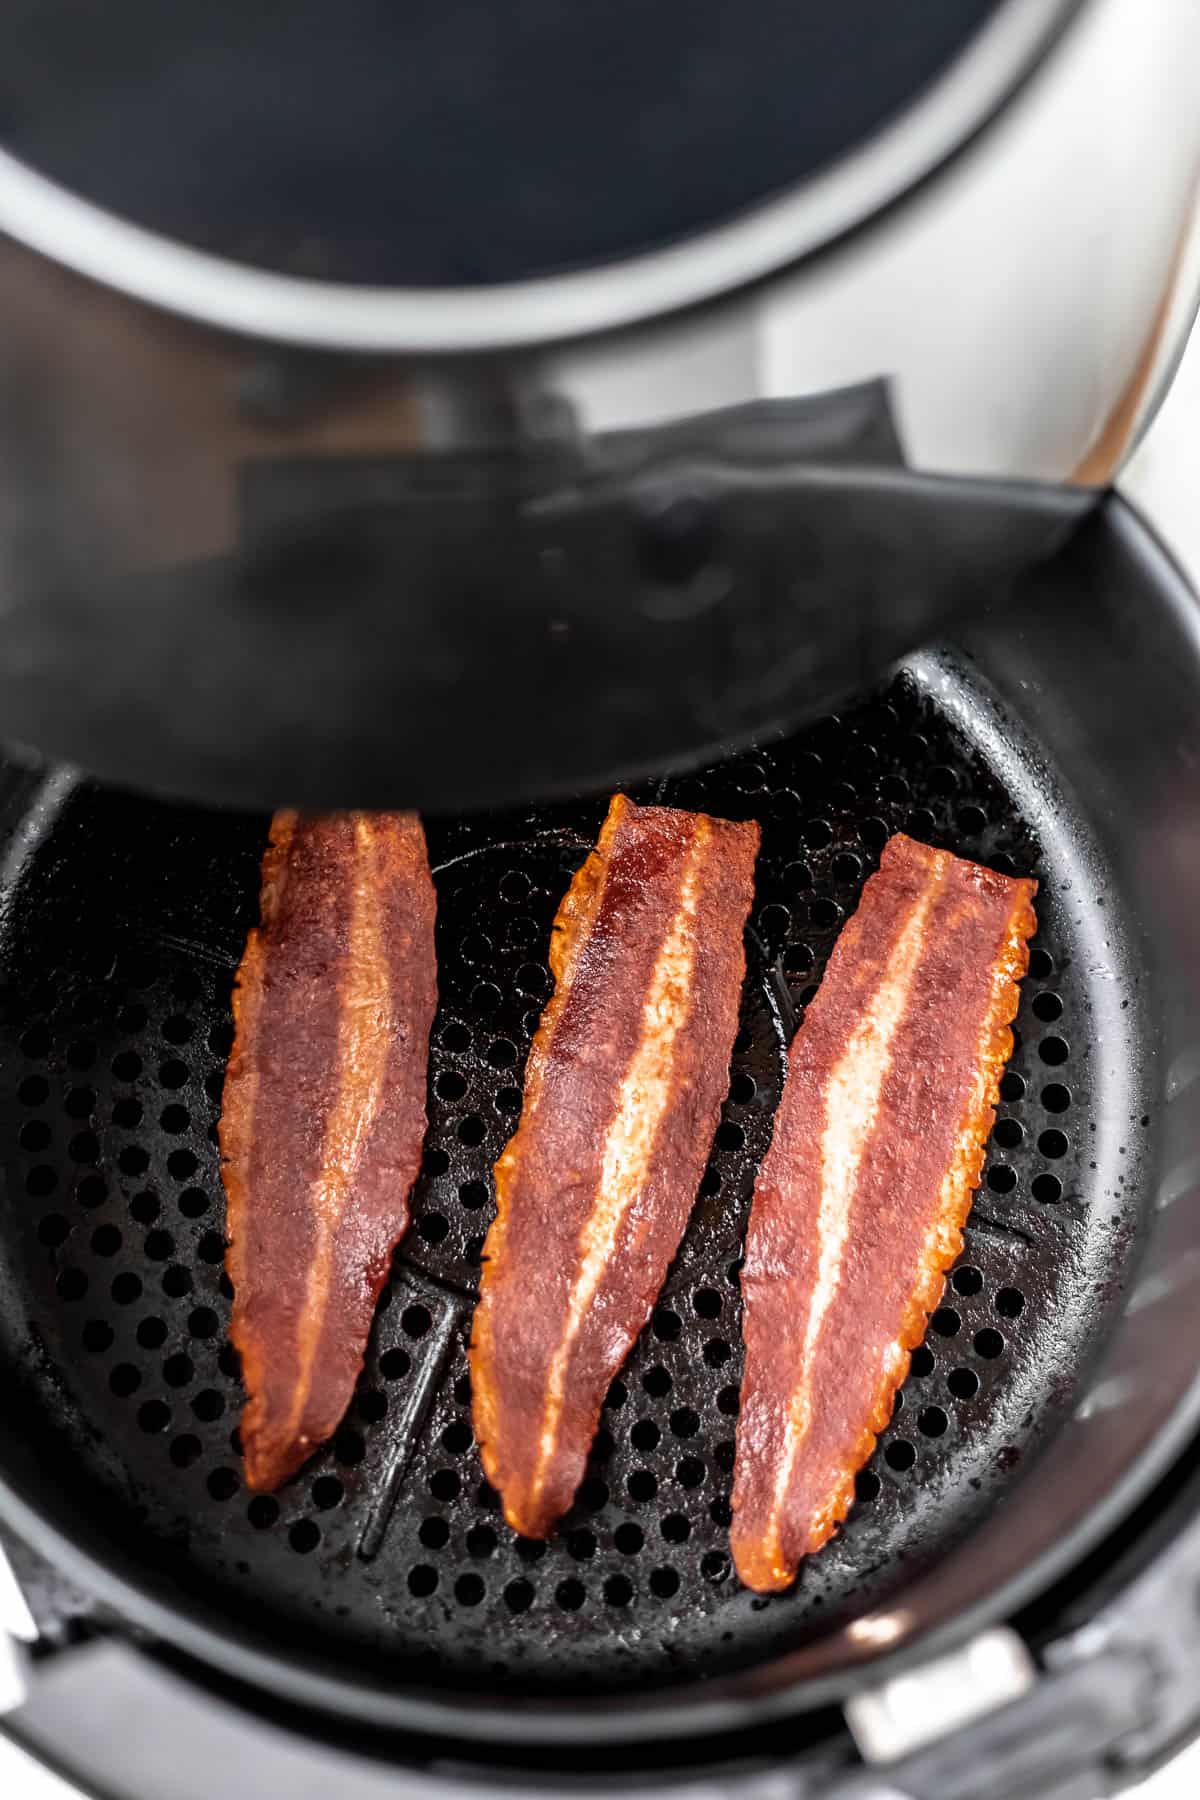 Cooked turkey bacon shown in an opened air fry basket.